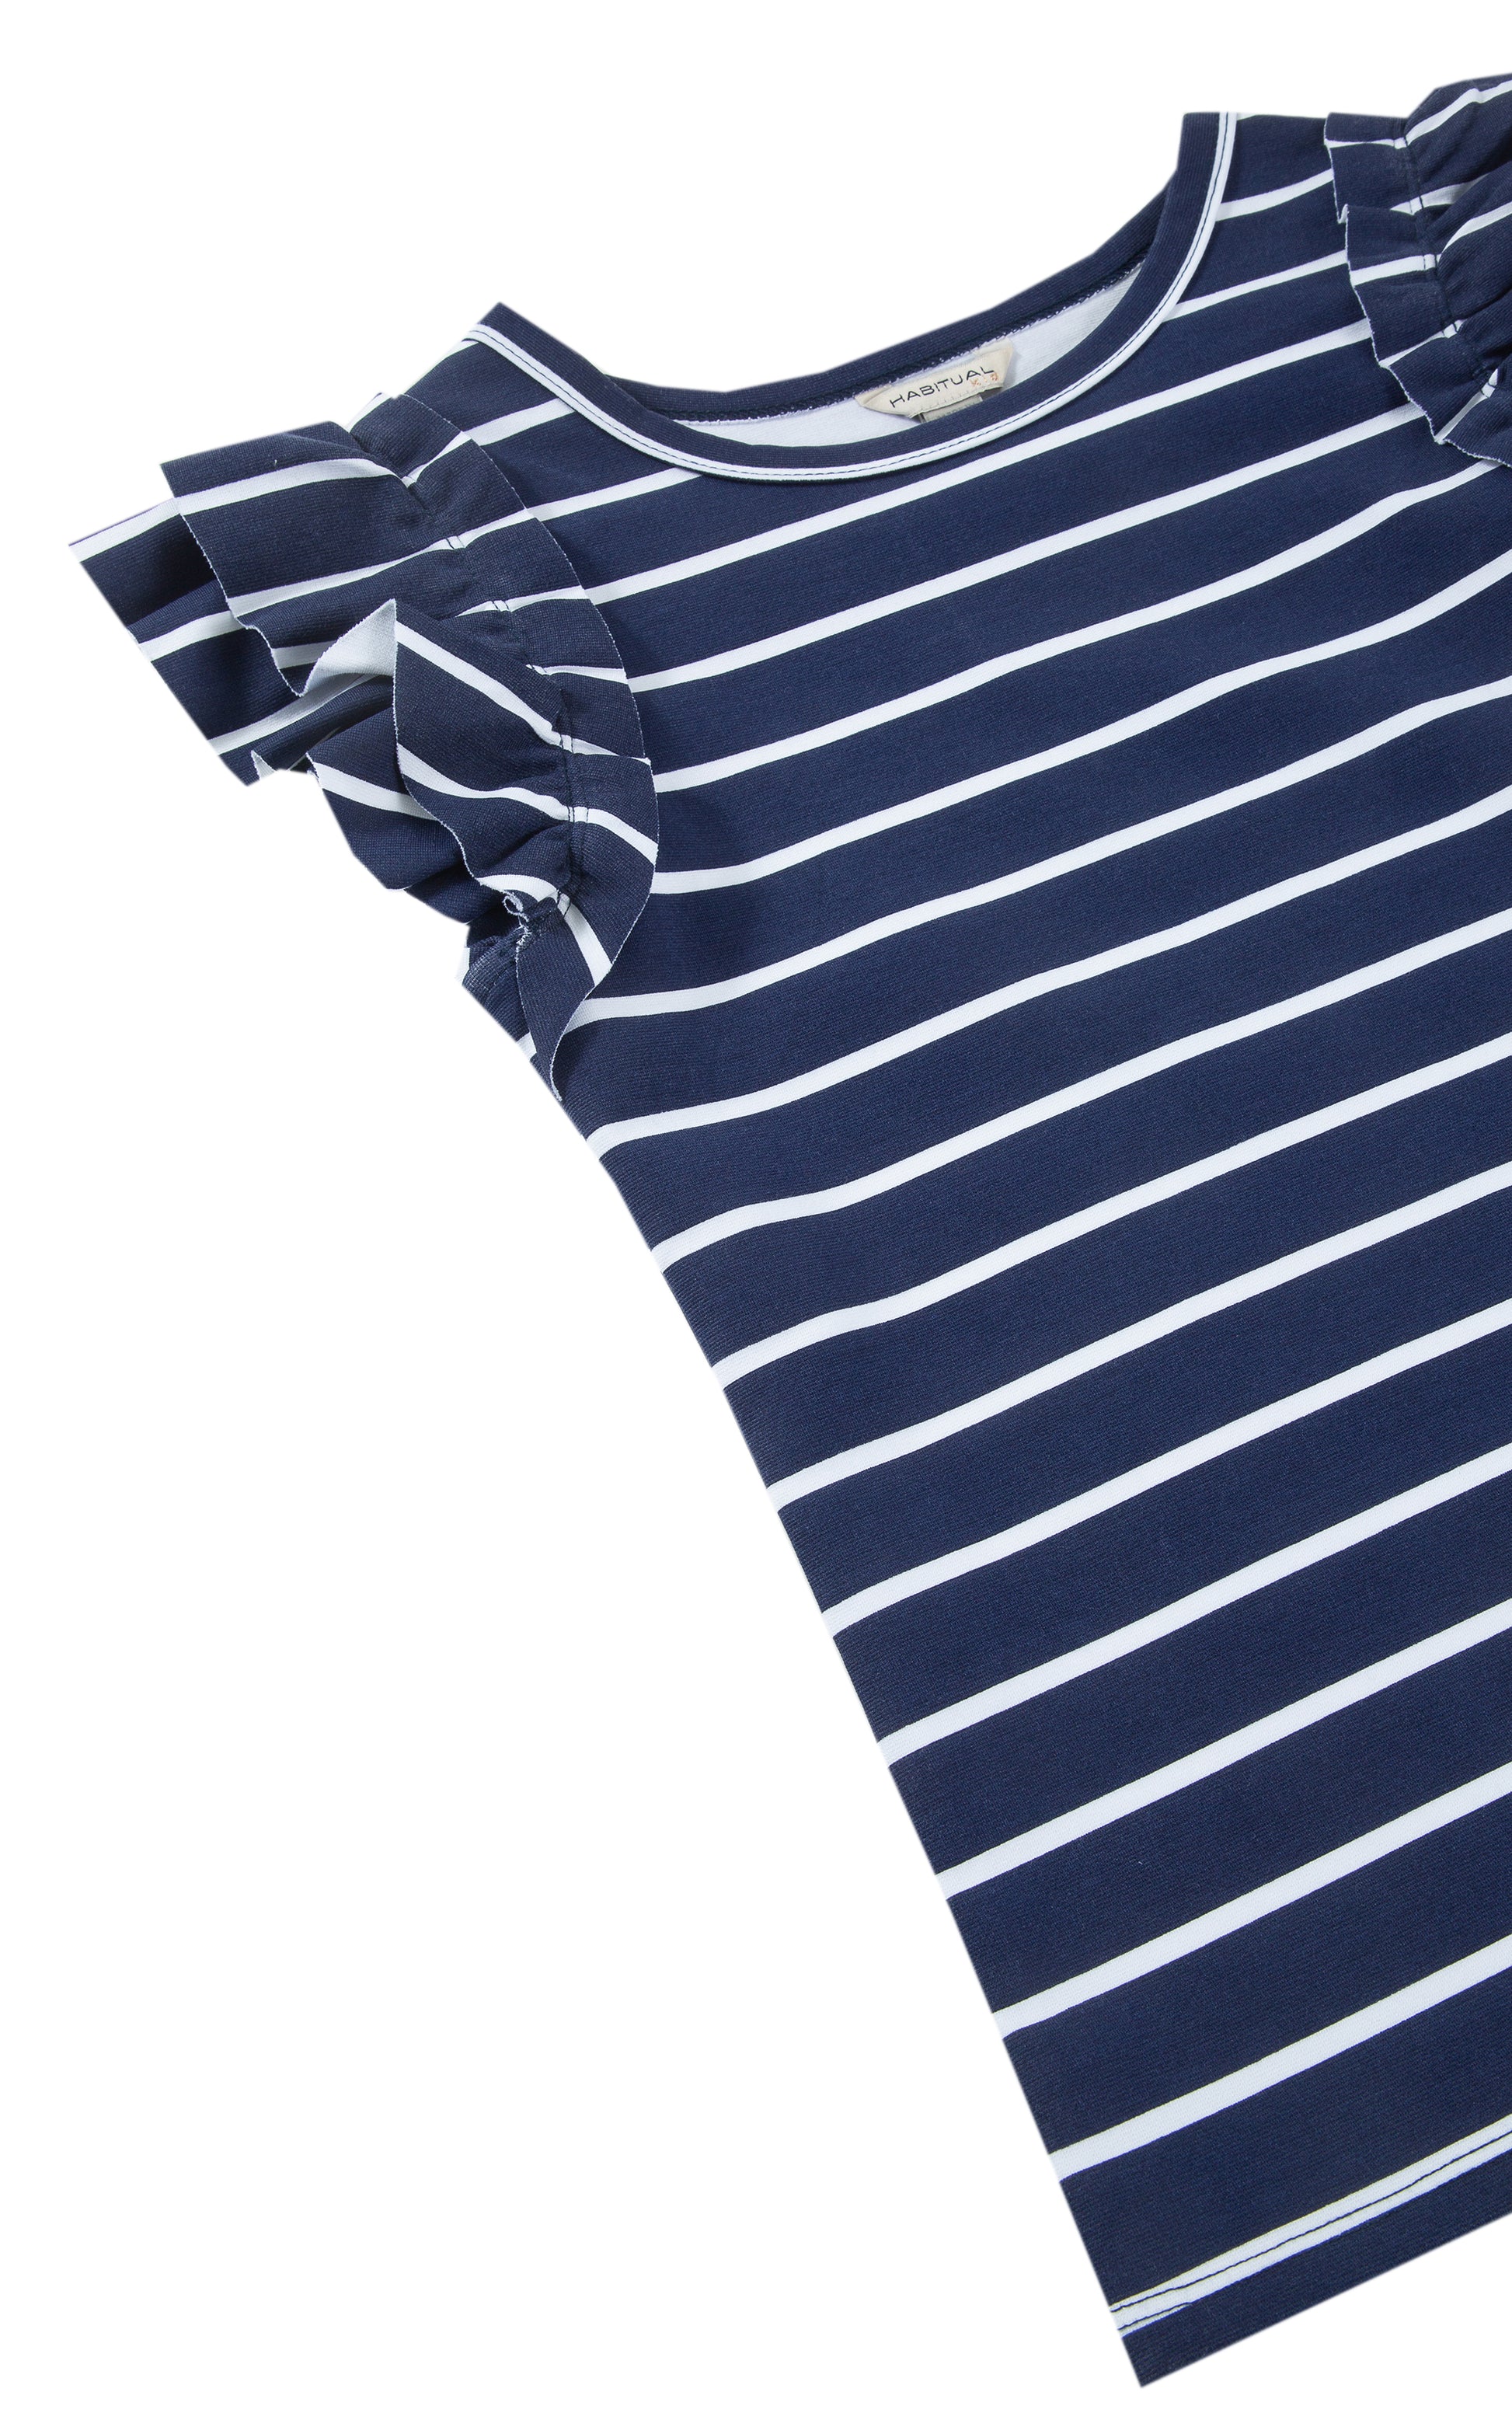 CLOSE UP OF DARK BLUE AND WHITE STRIPED RUFFLE CAP-SLEEVE T-SHIRT